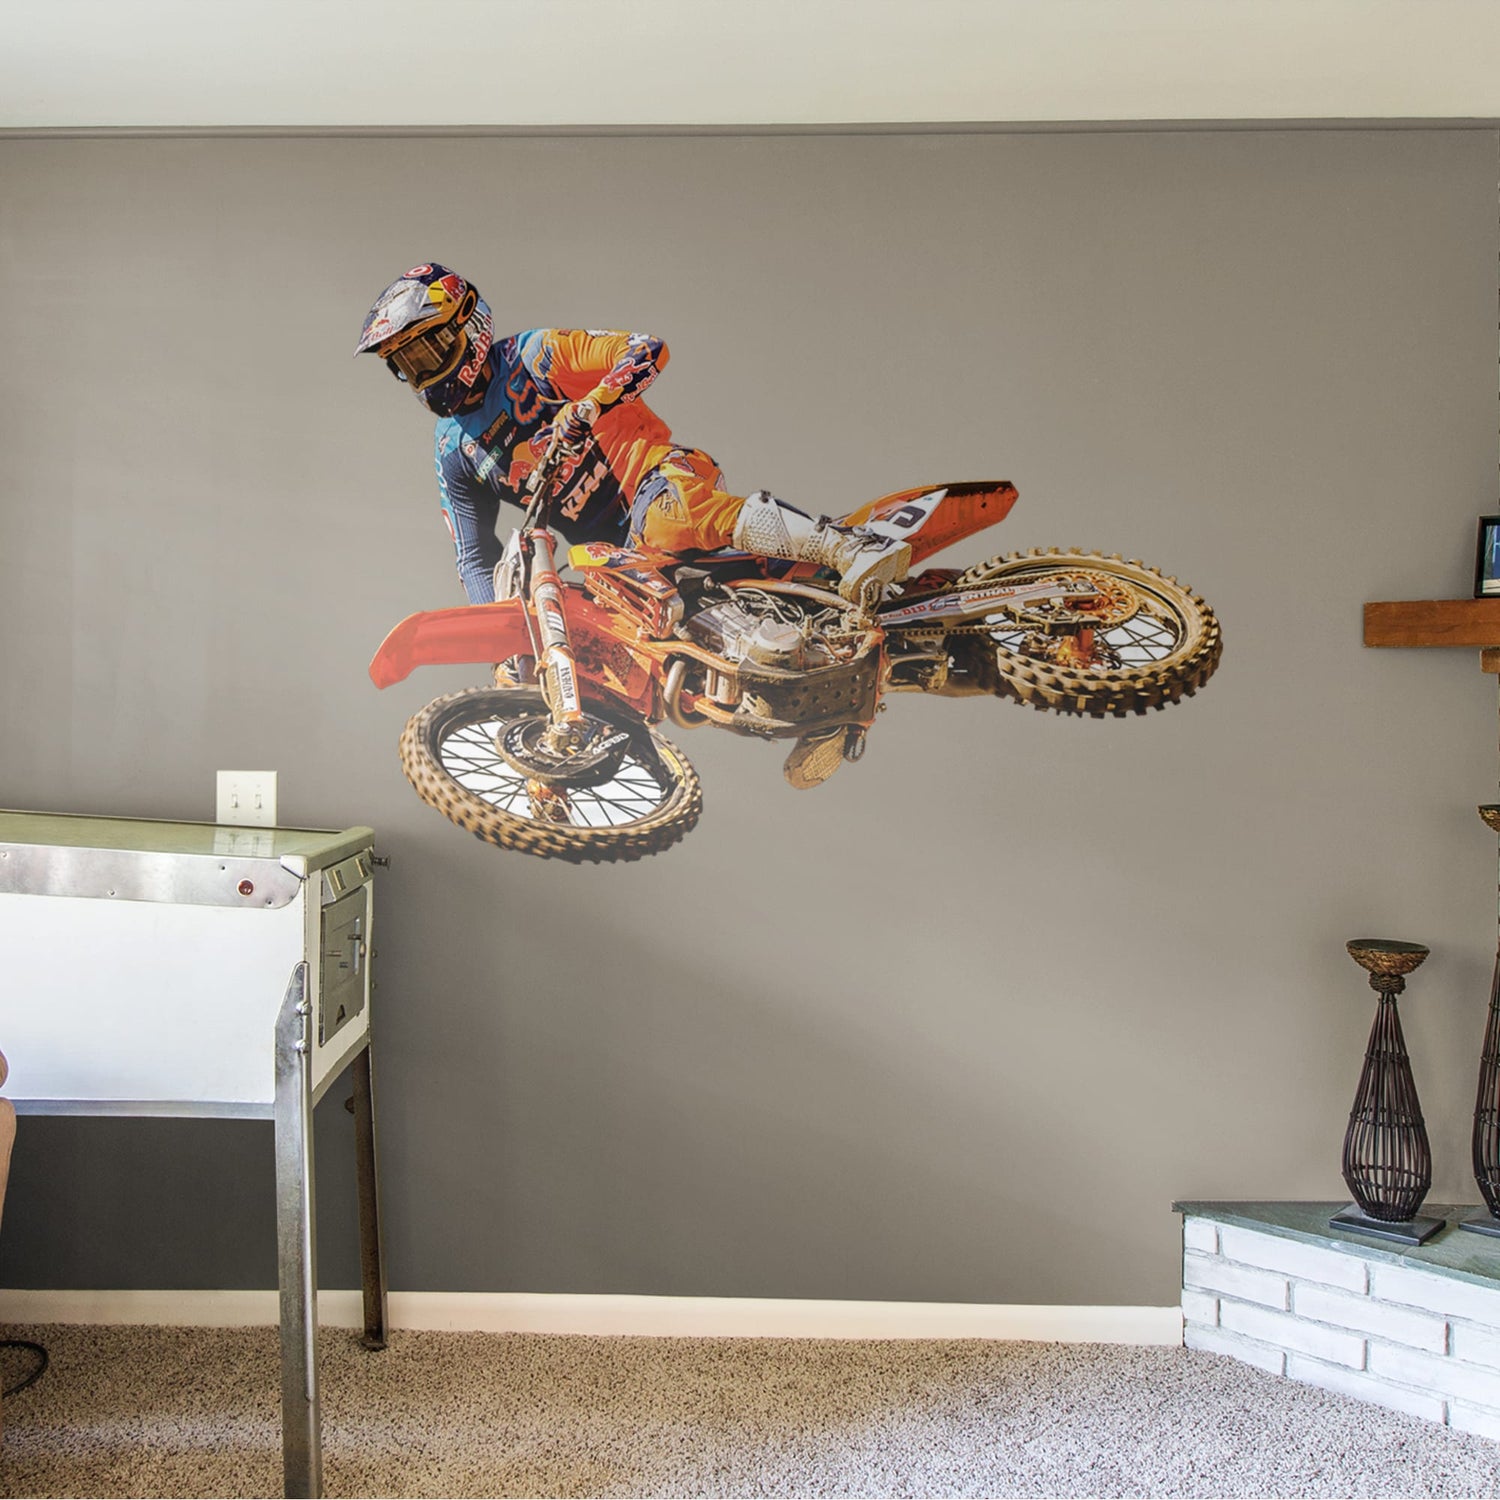 Action Sports Wall Decals